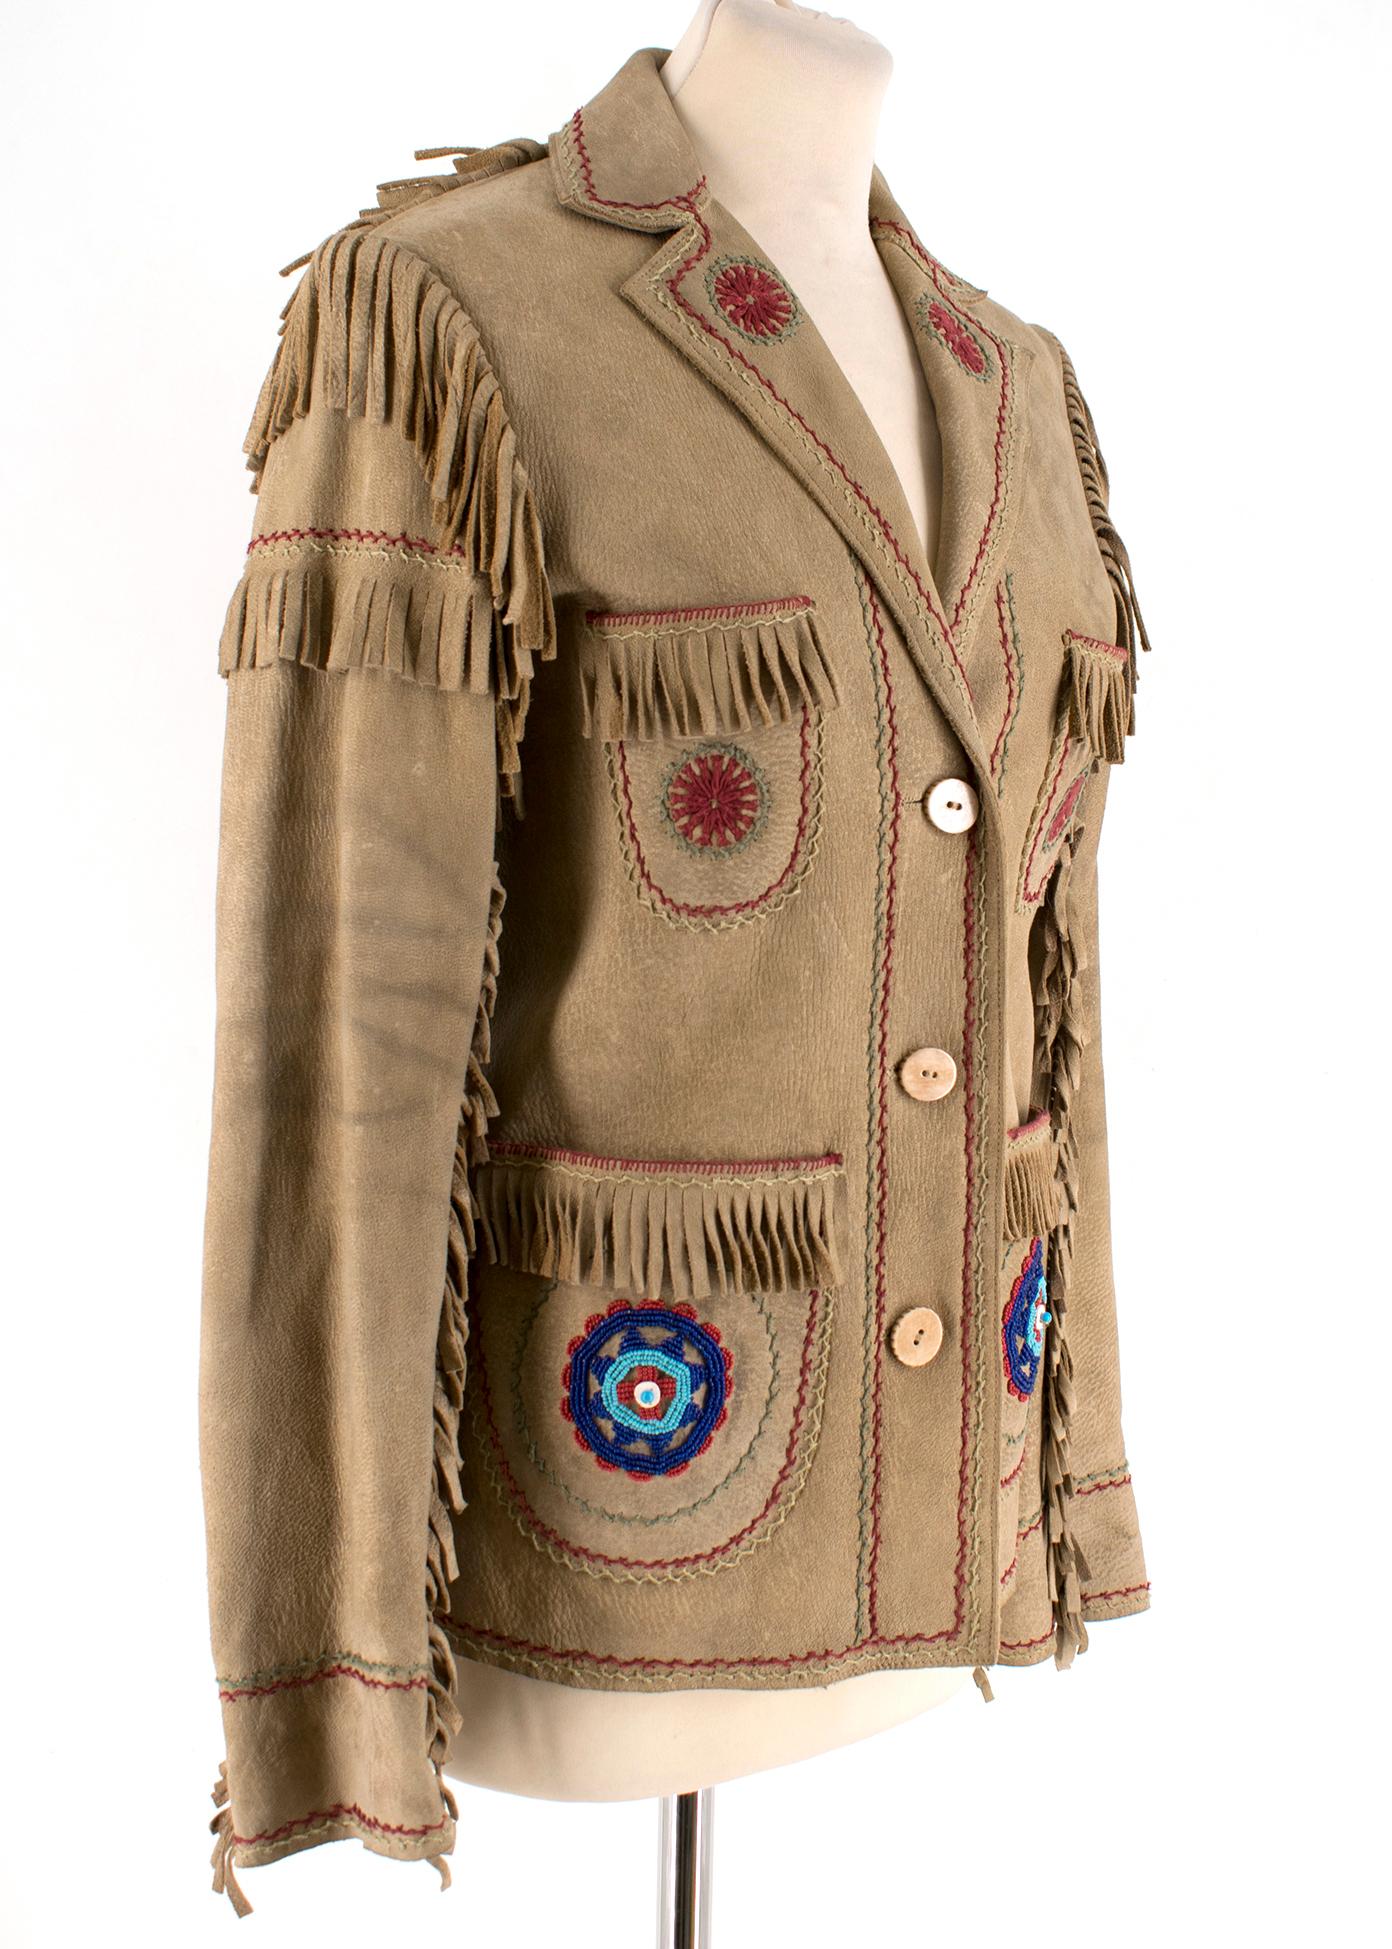 Ralph Lauren Fringe-Trim Leather Jacket with Beaded Embellishment RRP £1550

- Long Sleeve 
- Leather Fringe Trim 
- Three-Down Front Button Fastening 
- Four Front Slip Pockets 

100% Deer Skin 

Made in China 

Dry Clean Only 

Please note, these